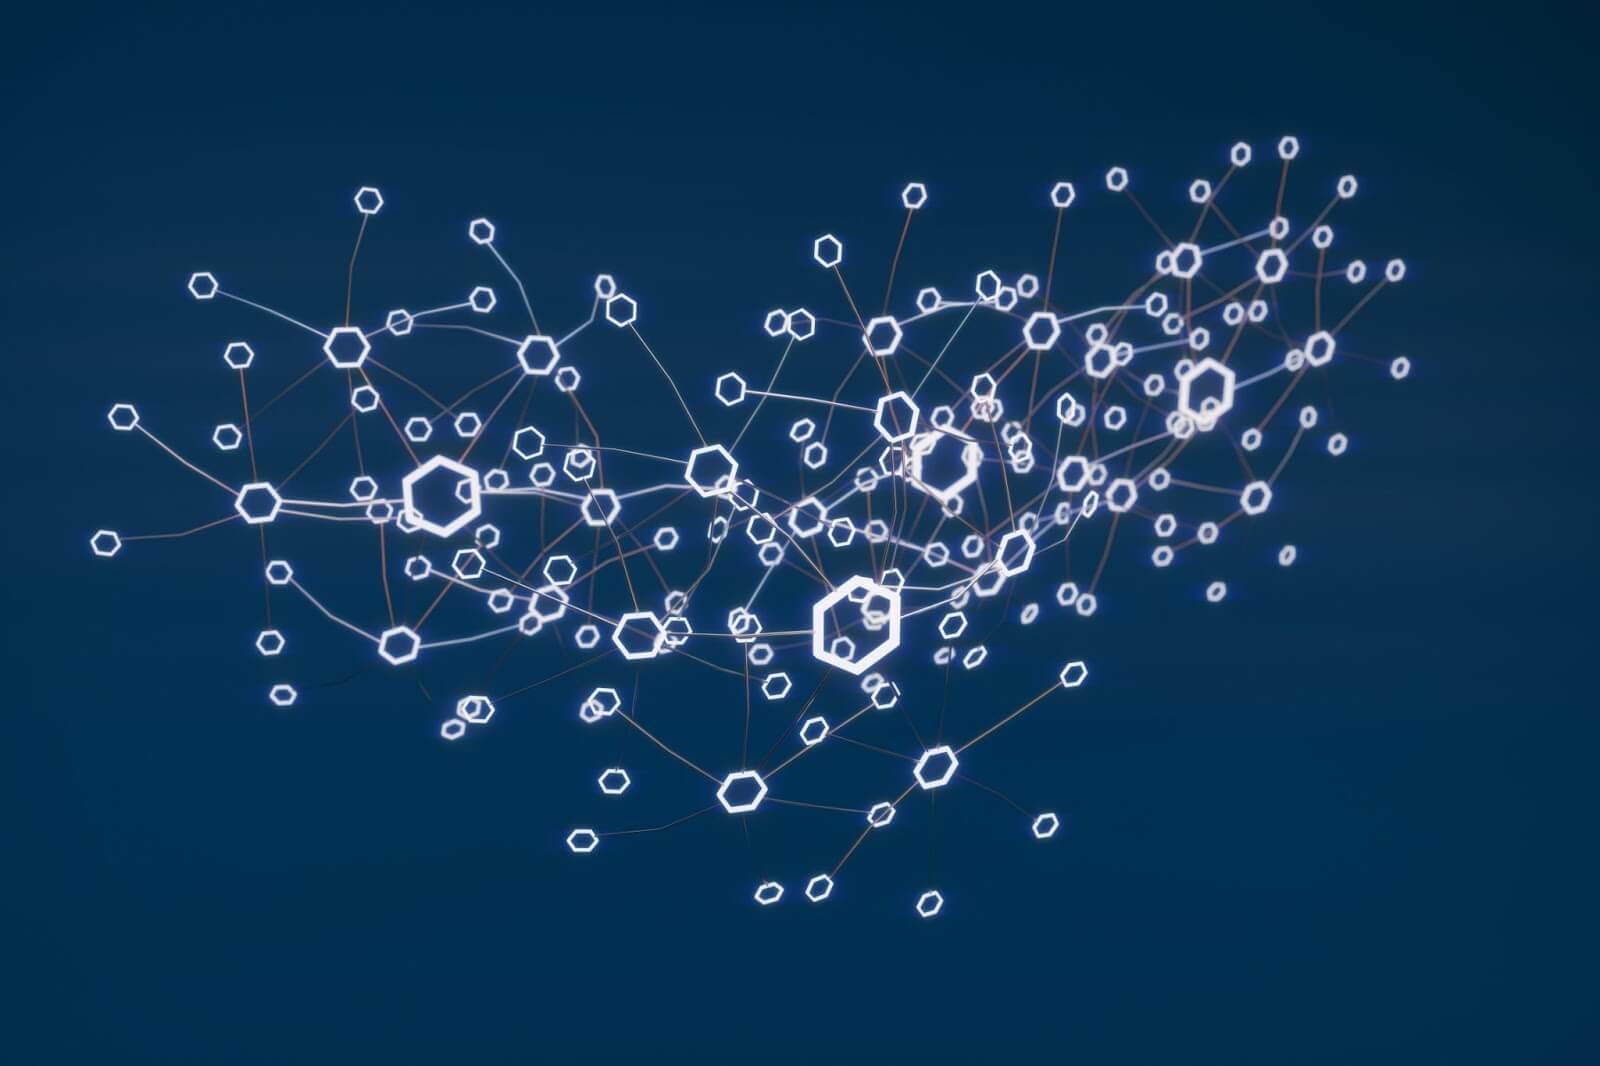 A graphic representing blockchain technology. Lots of small white hexagon shapes interconnected with lines and a dark blue background